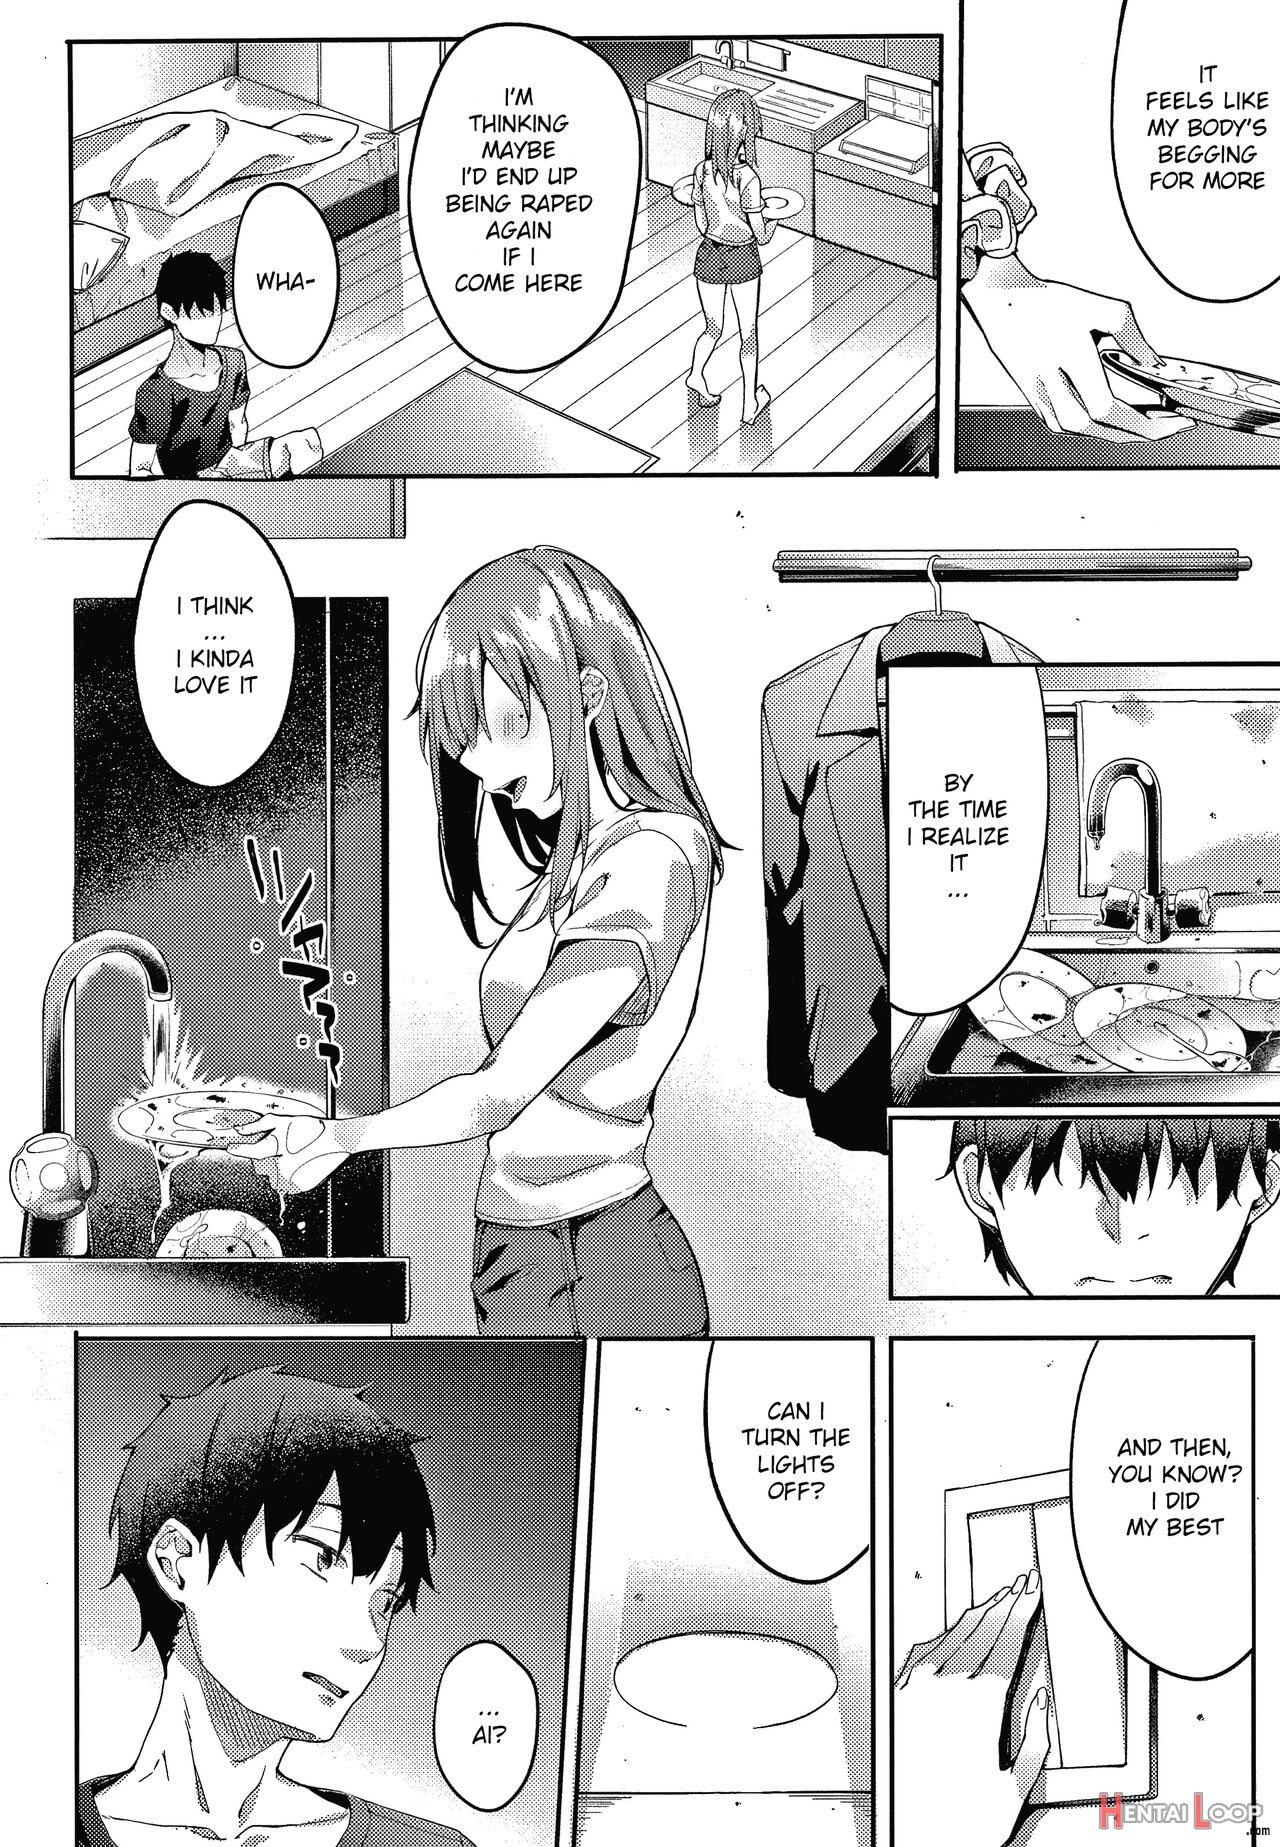 Only You 2.0 page 4